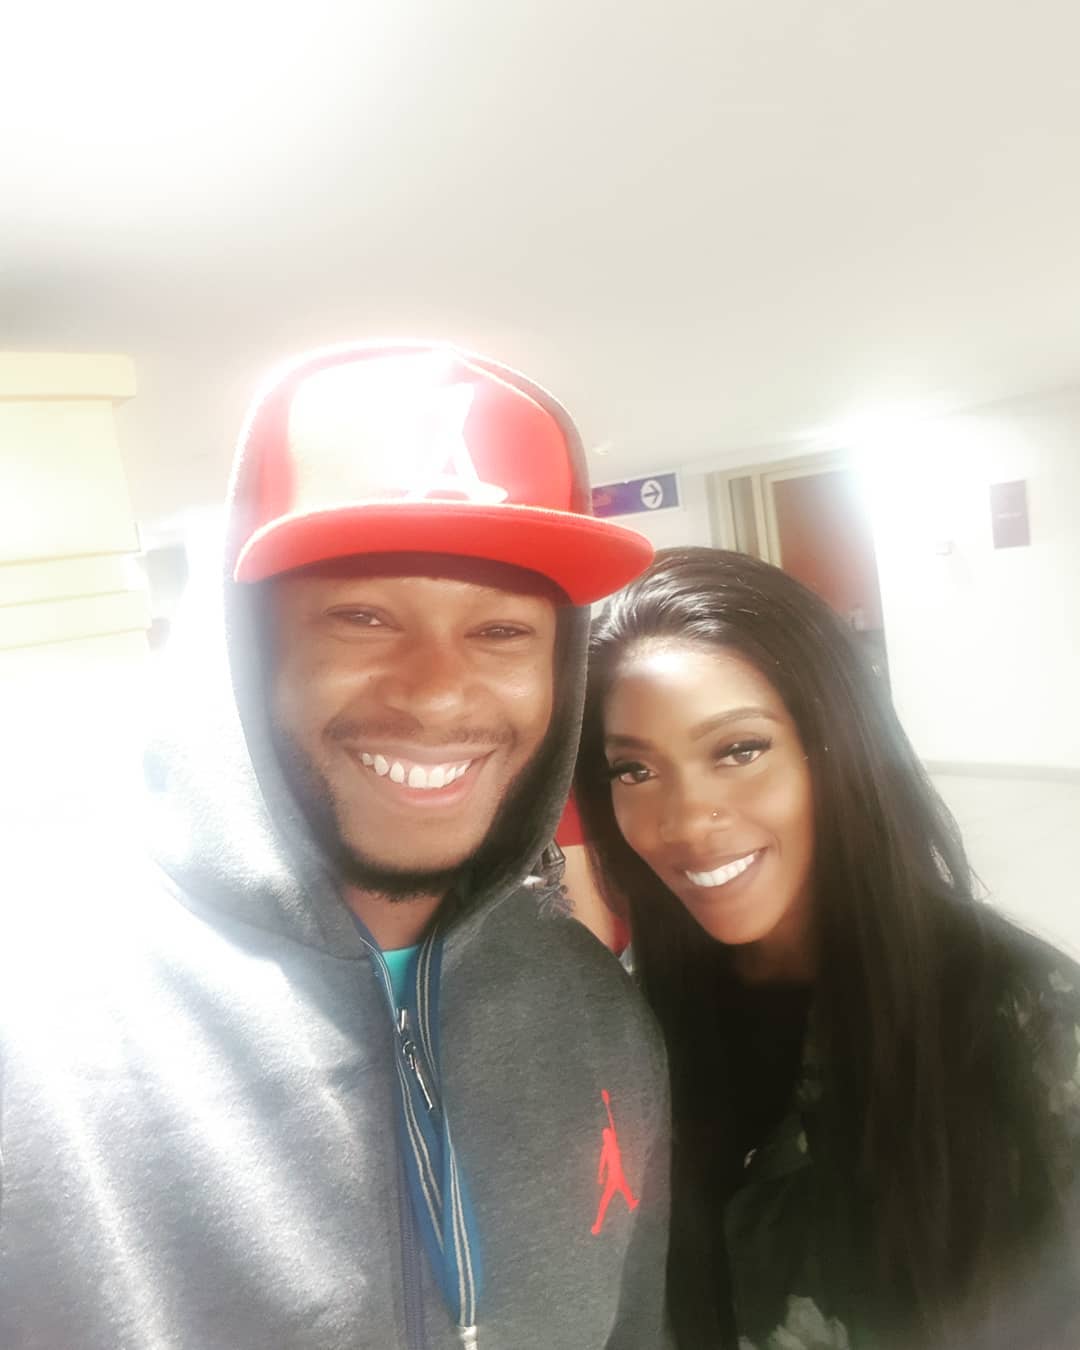 2018-09-18-Redsan Drama In Kellywood: Tiwa Savage, Demarco For 5th Album Release, Allegedly Beats Up Producer Dr. Sappy